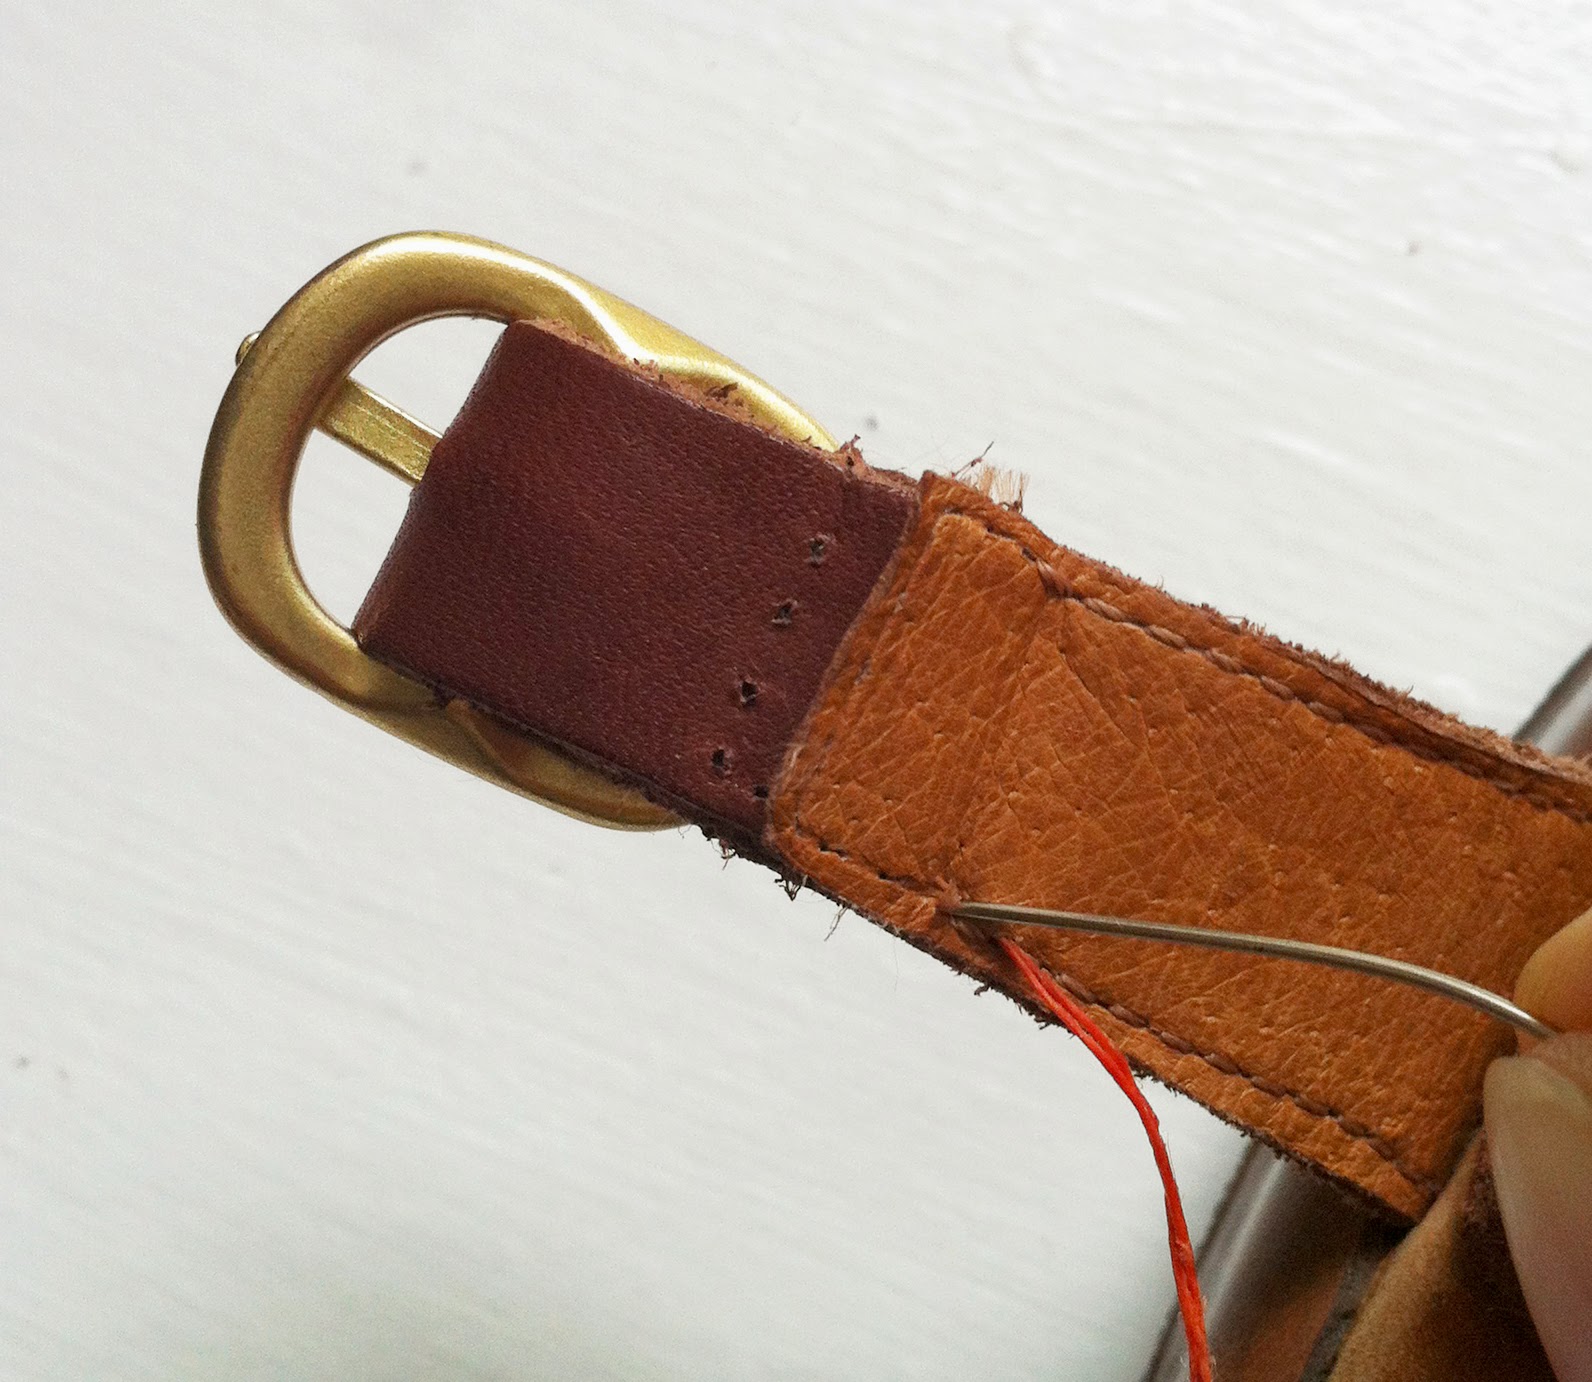 forty-two roads: How To Fix a Shoe Buckle!